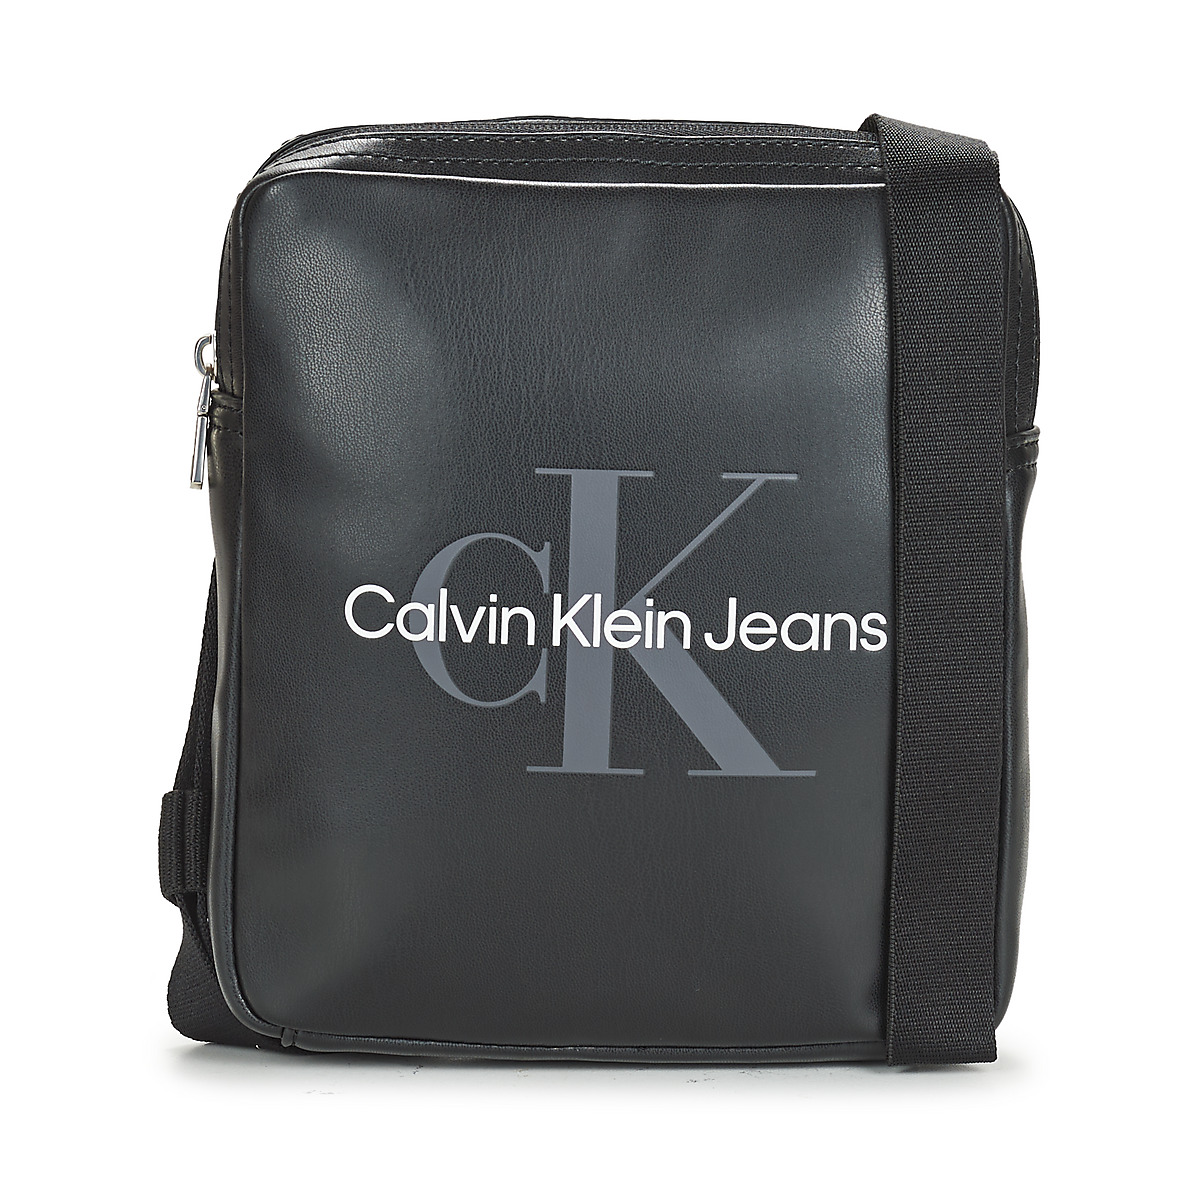 Calvin Klein Jeans REPORTER18 MONOGRAM Clutches - / 77,00 ! - Fast Men Pouches Bags Spartoo Black | € Europe SOFT delivery